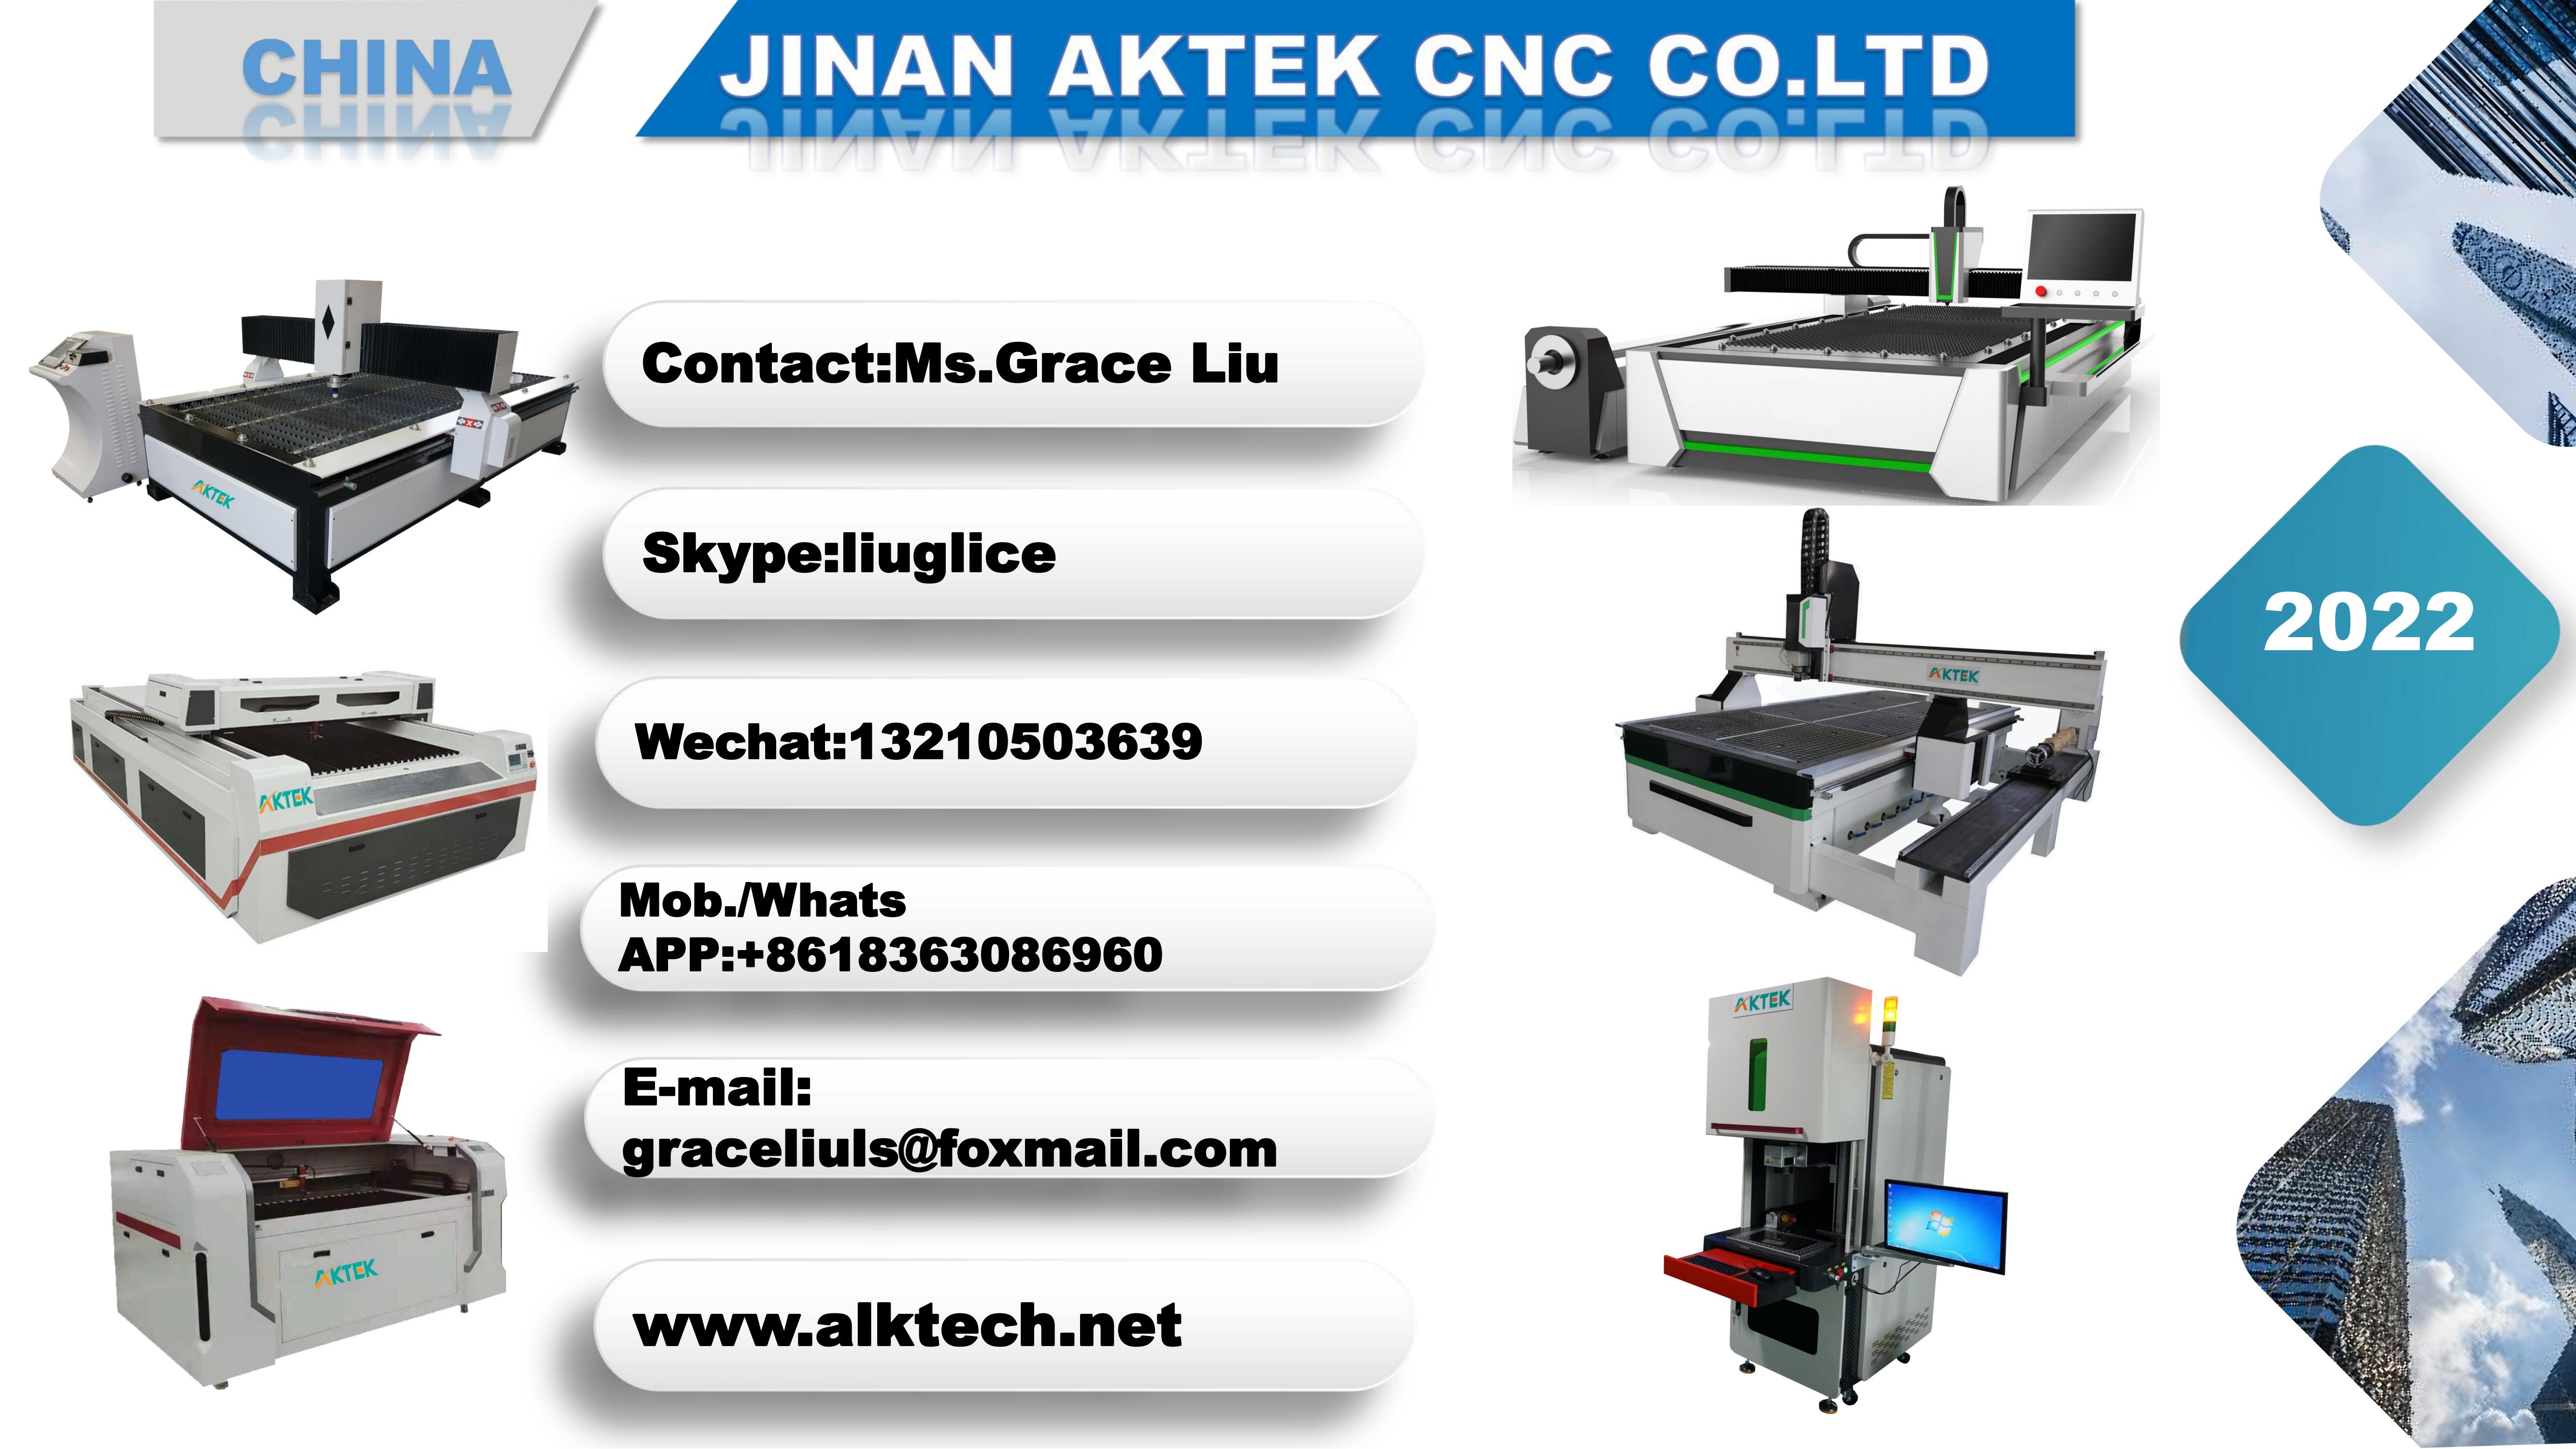 Stone CNC Router Marble Granite Carving Engraving Cutting Machine